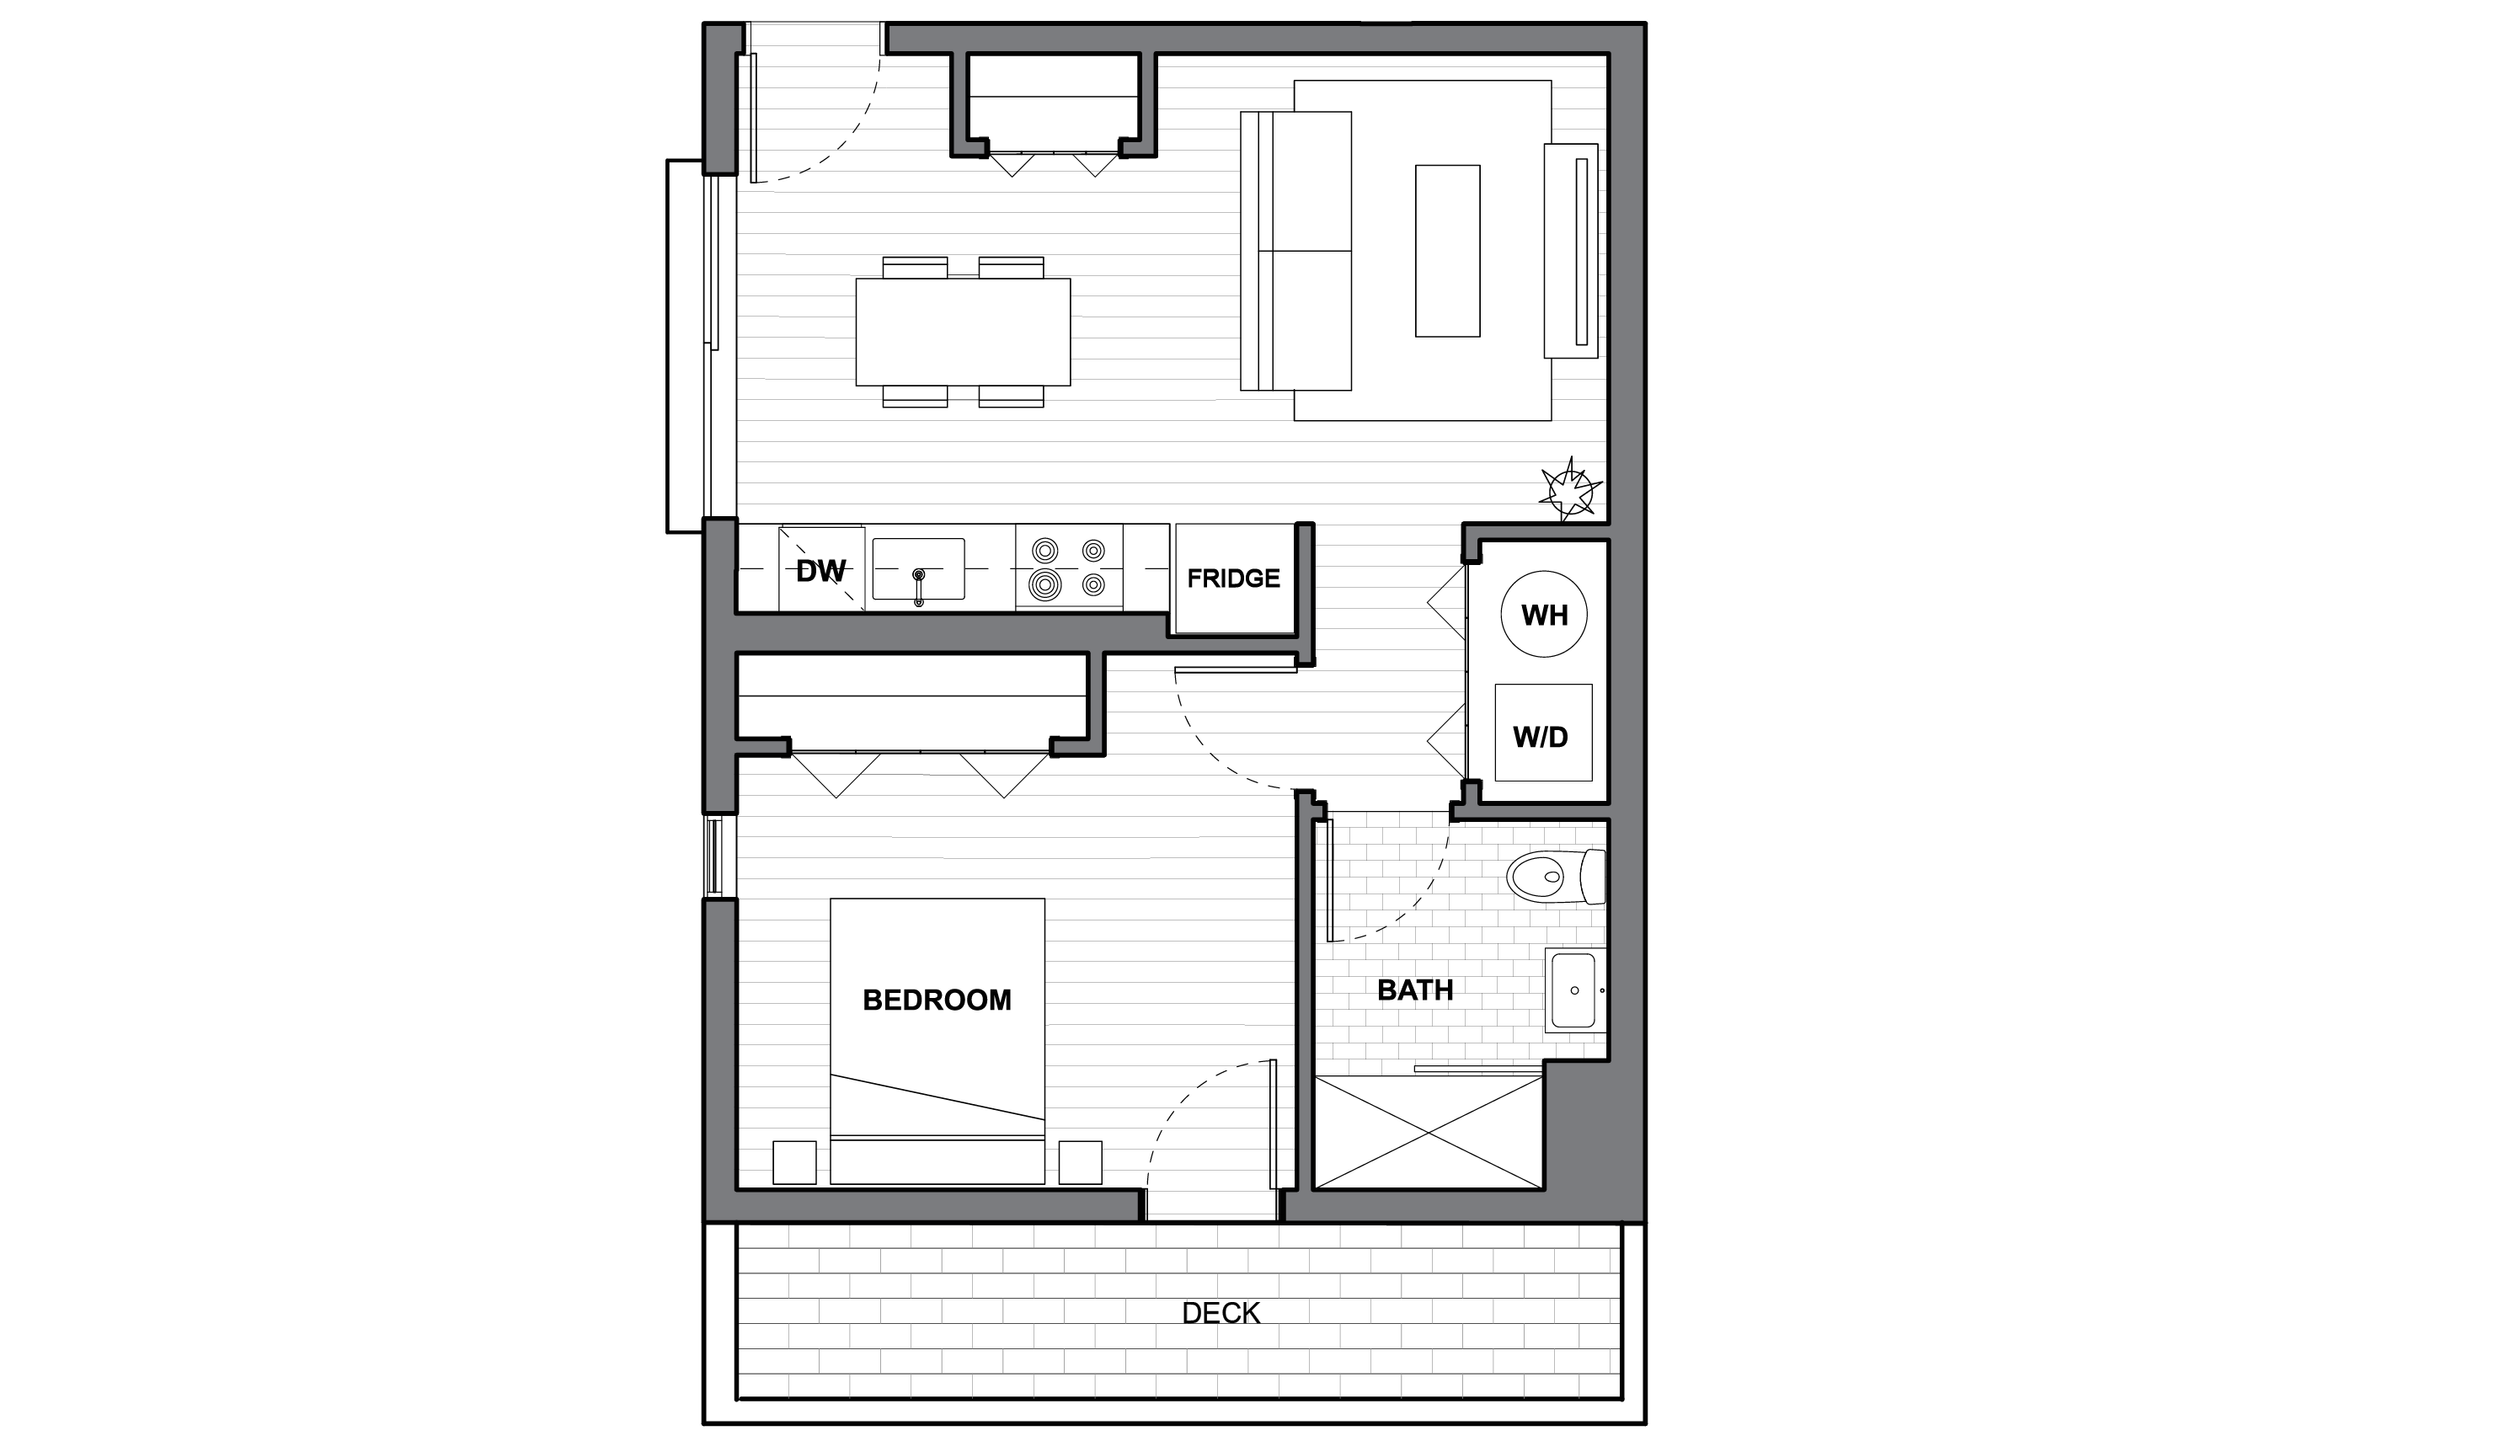   UNIT 203  1 BEDROOM / 1 BATH PRIVATE ROOF DECK 603 SQUARE FEET   REQUEST INFORMATION / APPLY FOR THIS UNIT   